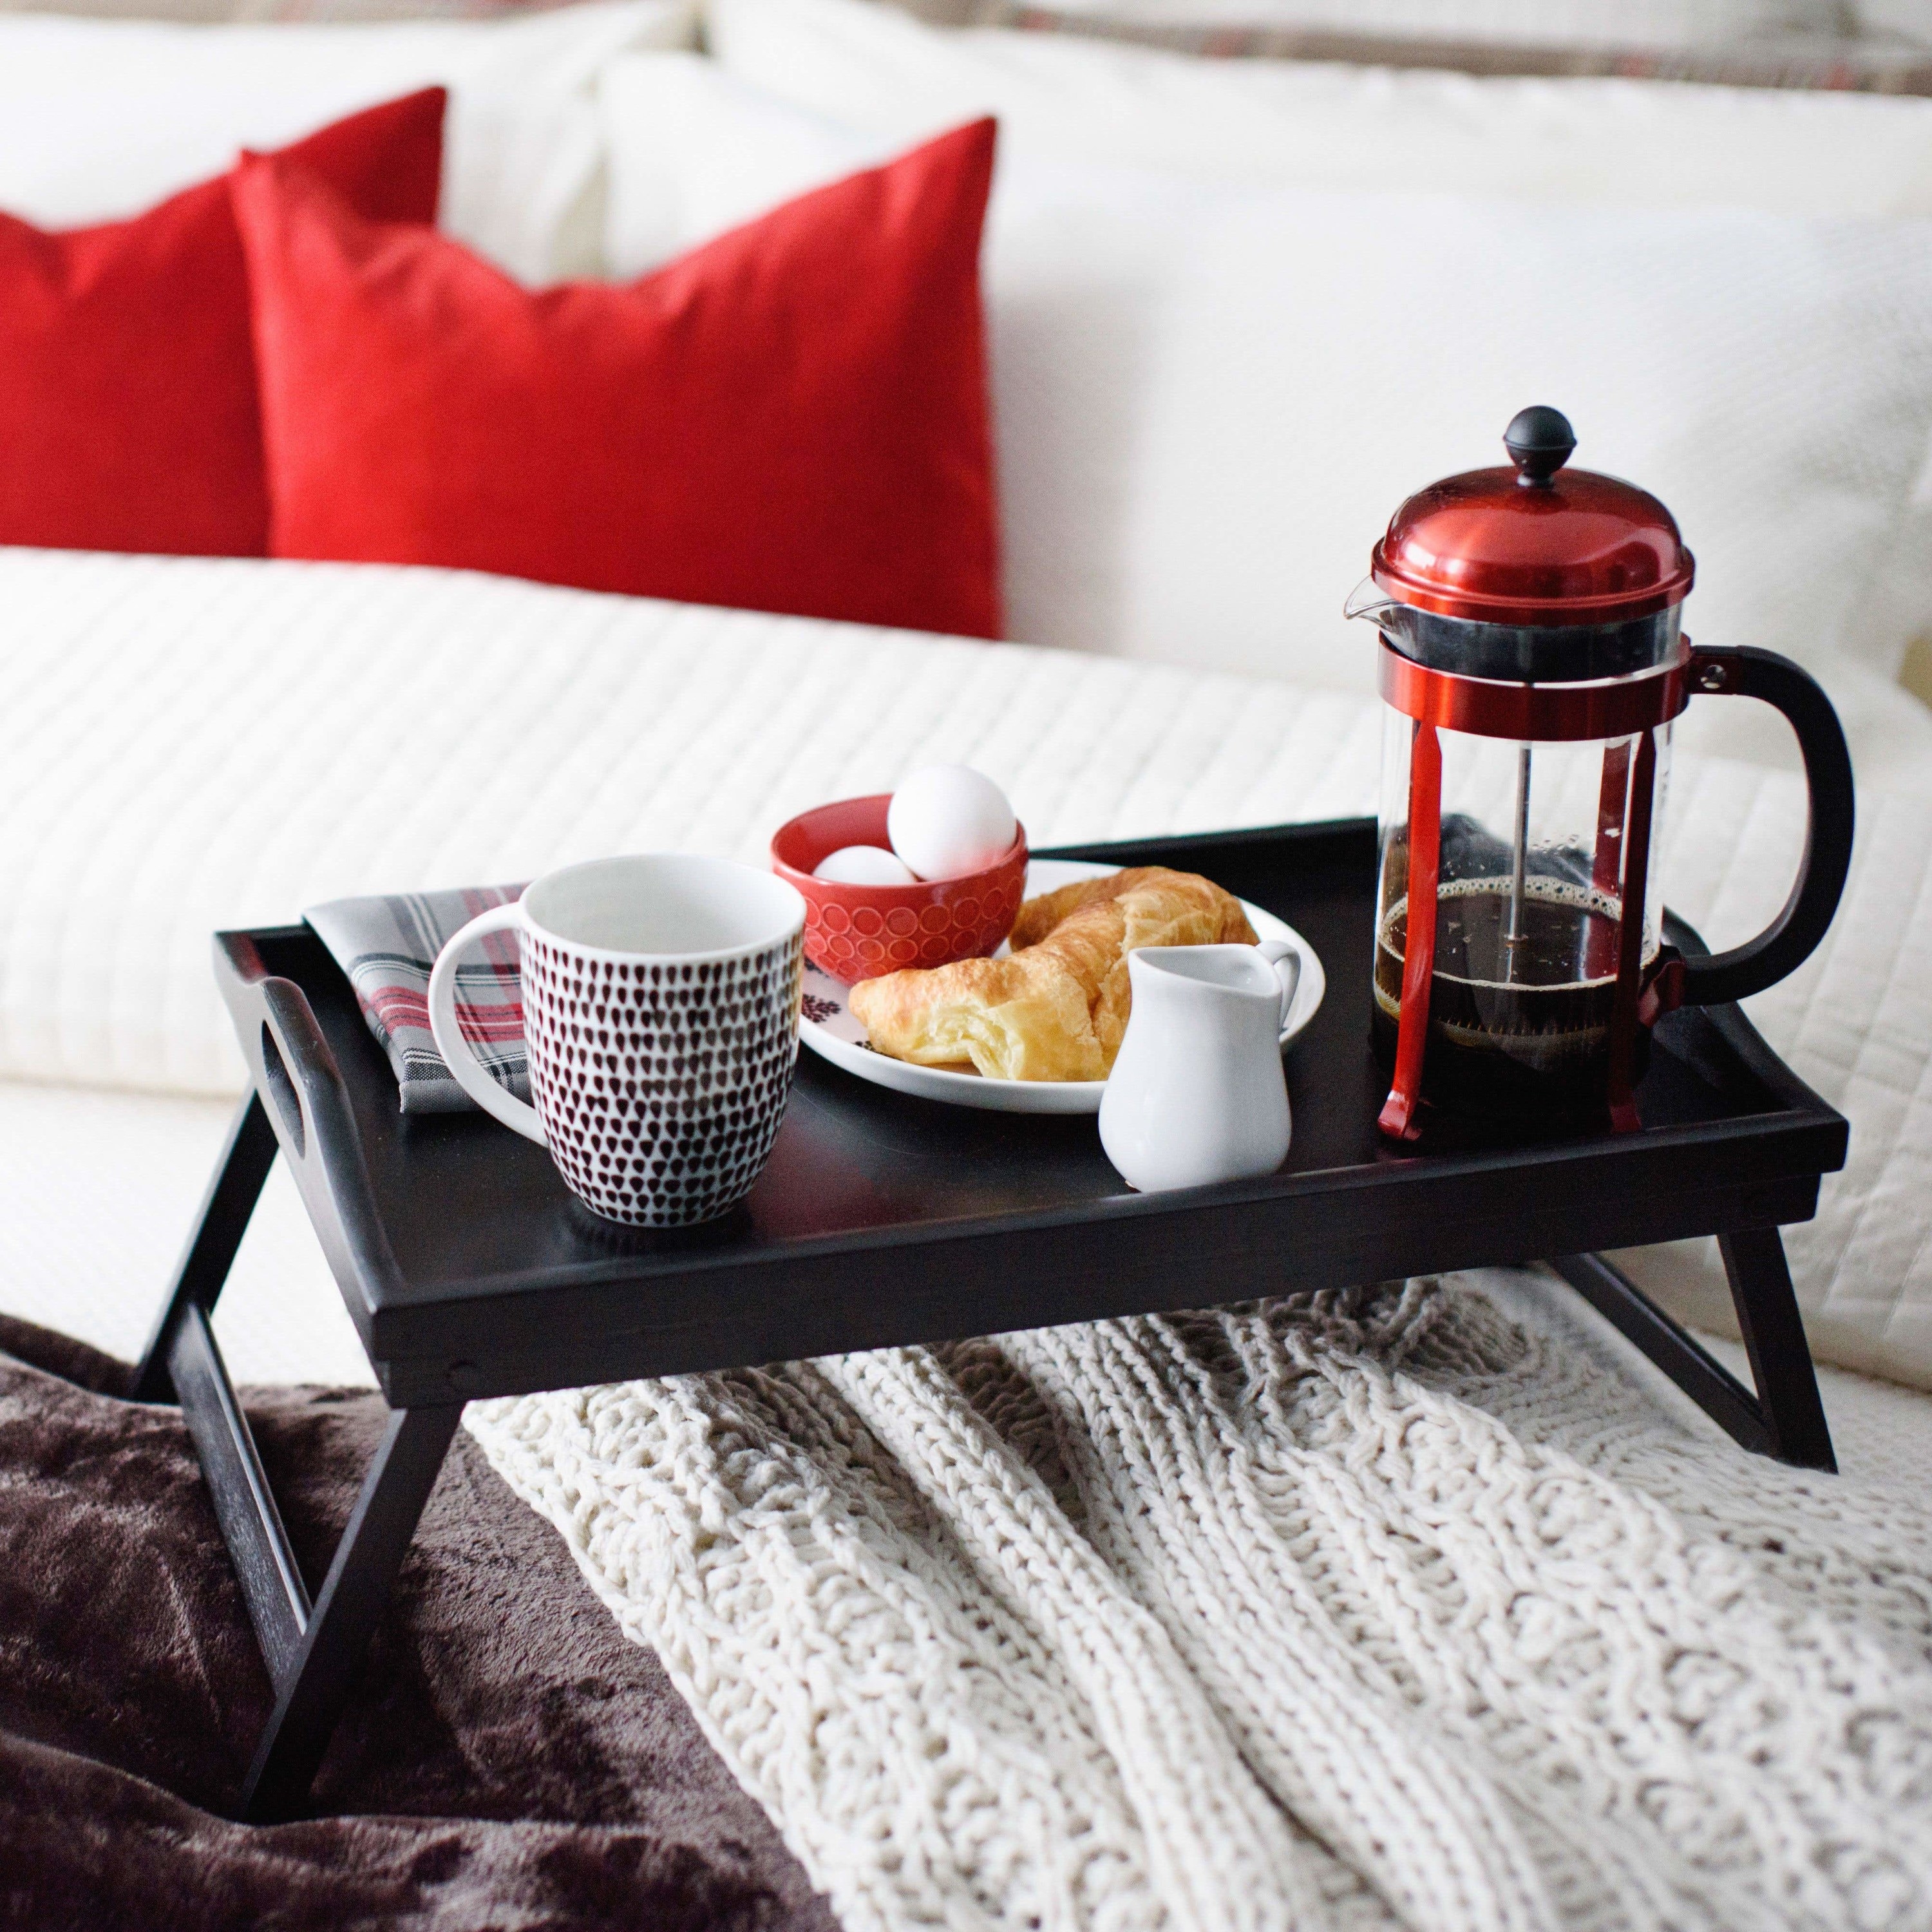 the tray on a bed with coffee and some breakfast foods